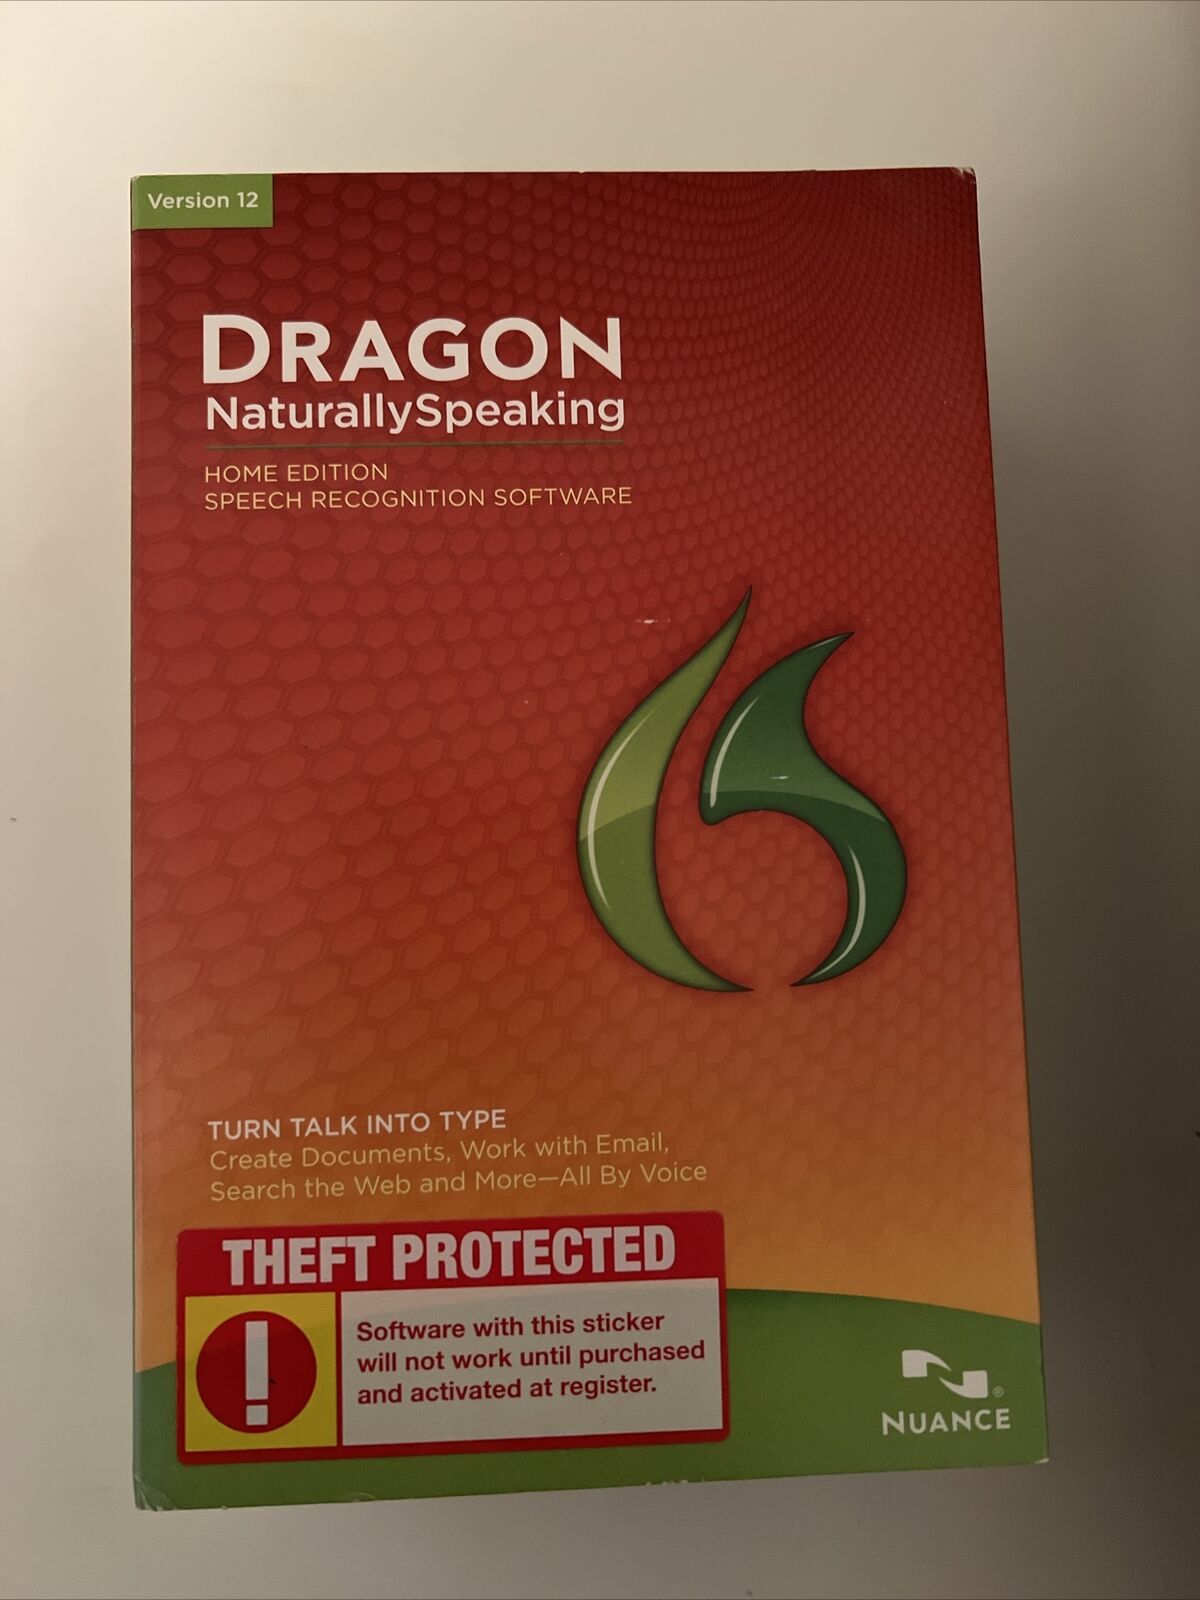 Dragon Version 12 Naturally Speaking Speech Recognition Software Home Edition